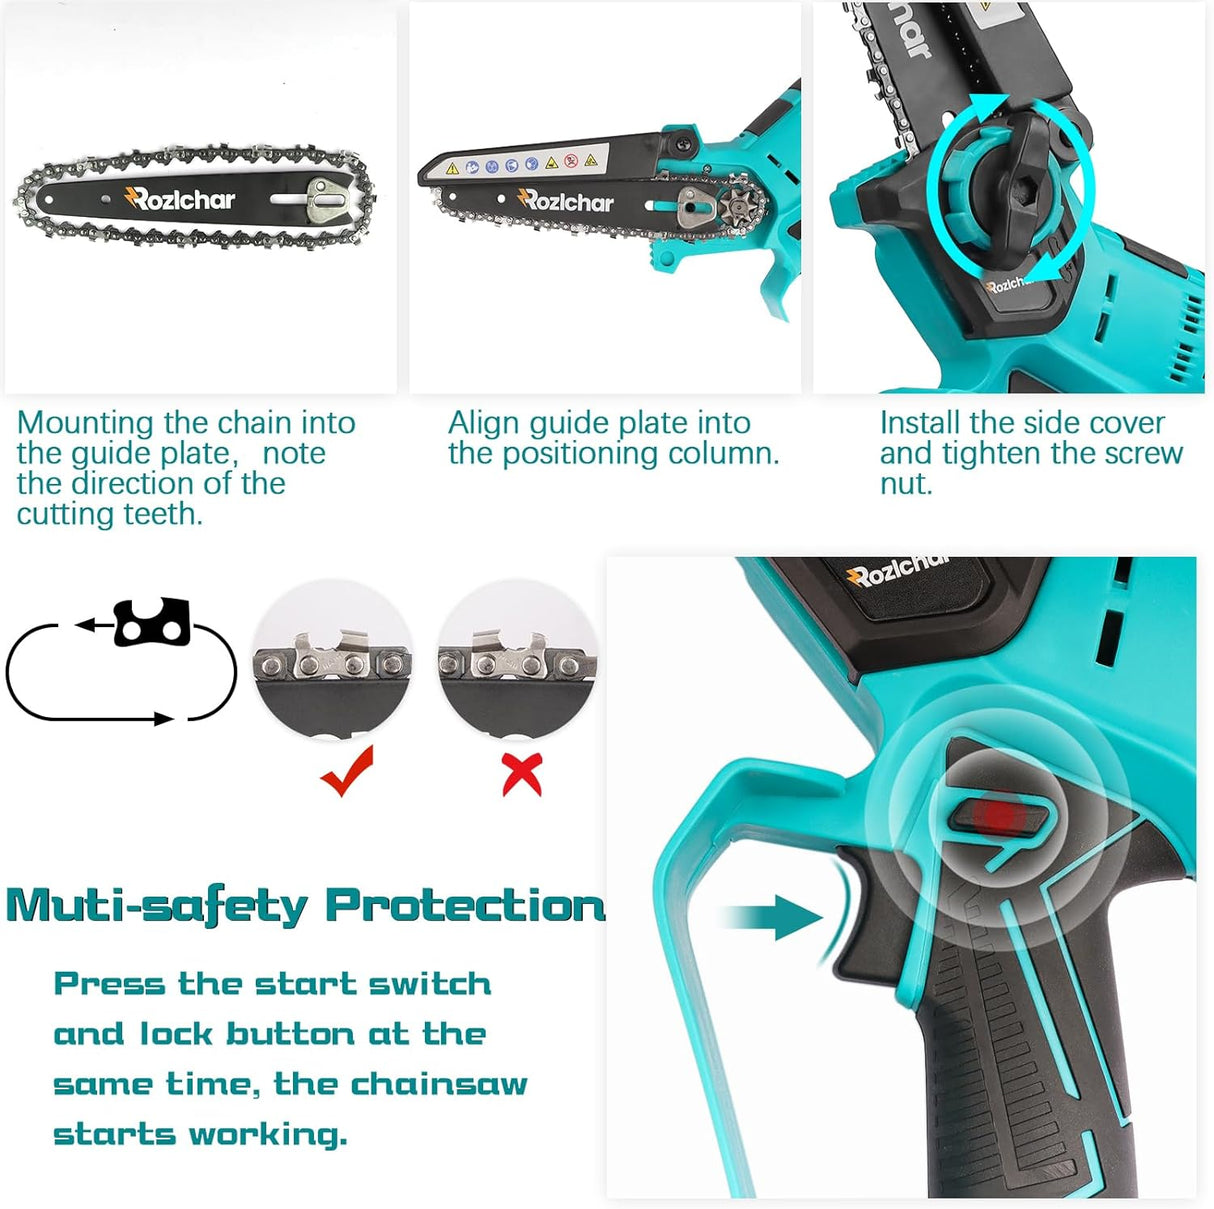 Cordless Mini Chainsaw for Makita 18V Battery, 6 Inch Battery Powered Pruning Saw with Security Lock, Replacement Chain for Tree Trimming | Wood Cutting | Home Renovation(Only Tool, No Battery)